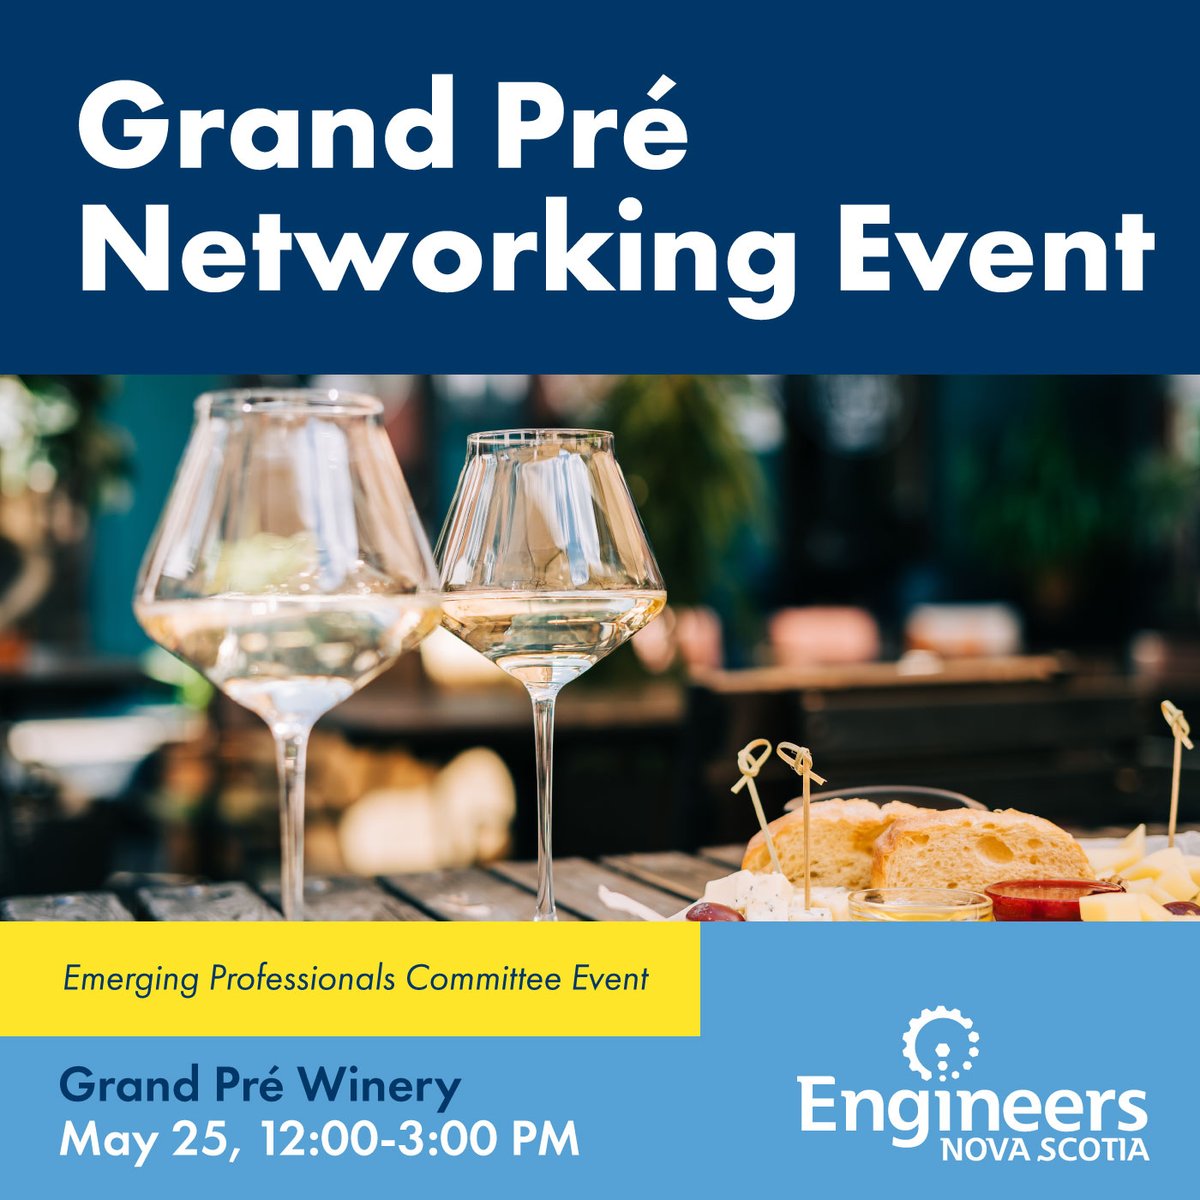 Enjoy a wine tasting and finger food at the Grand Pré Winery on May 25 in the beautiful Annapolis Valley. Register to meet other members of the Kentville/Wolfville engineering community and celebrate the end of spring: engineersnovascotia.ca/events/view/?e…